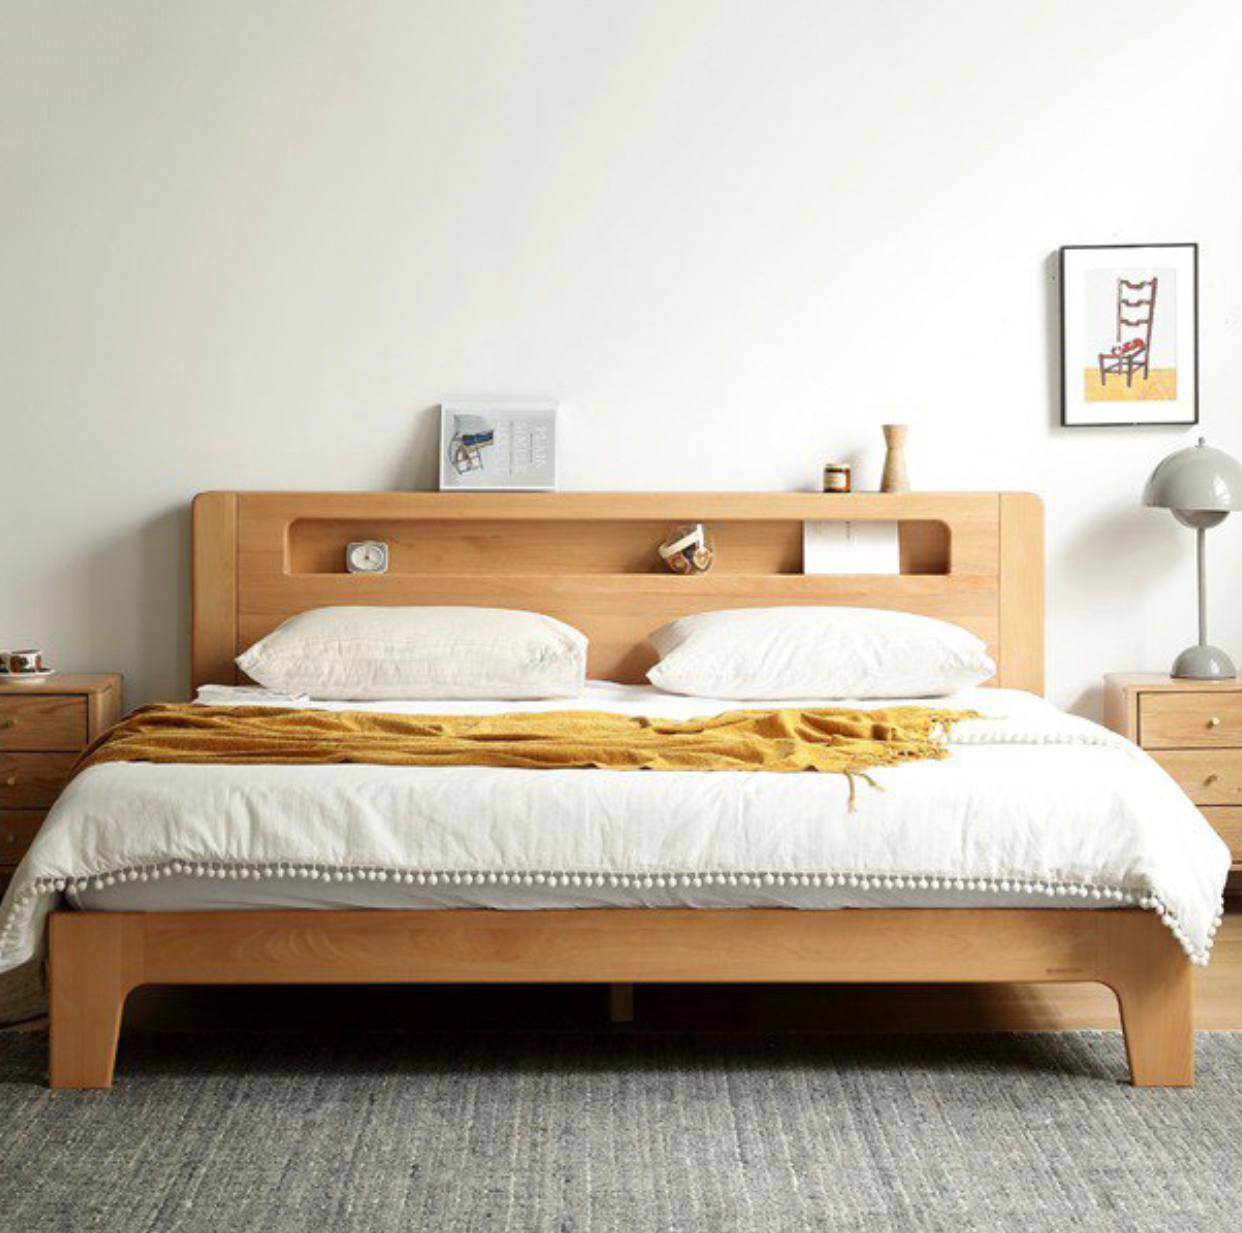 Beds solid wood